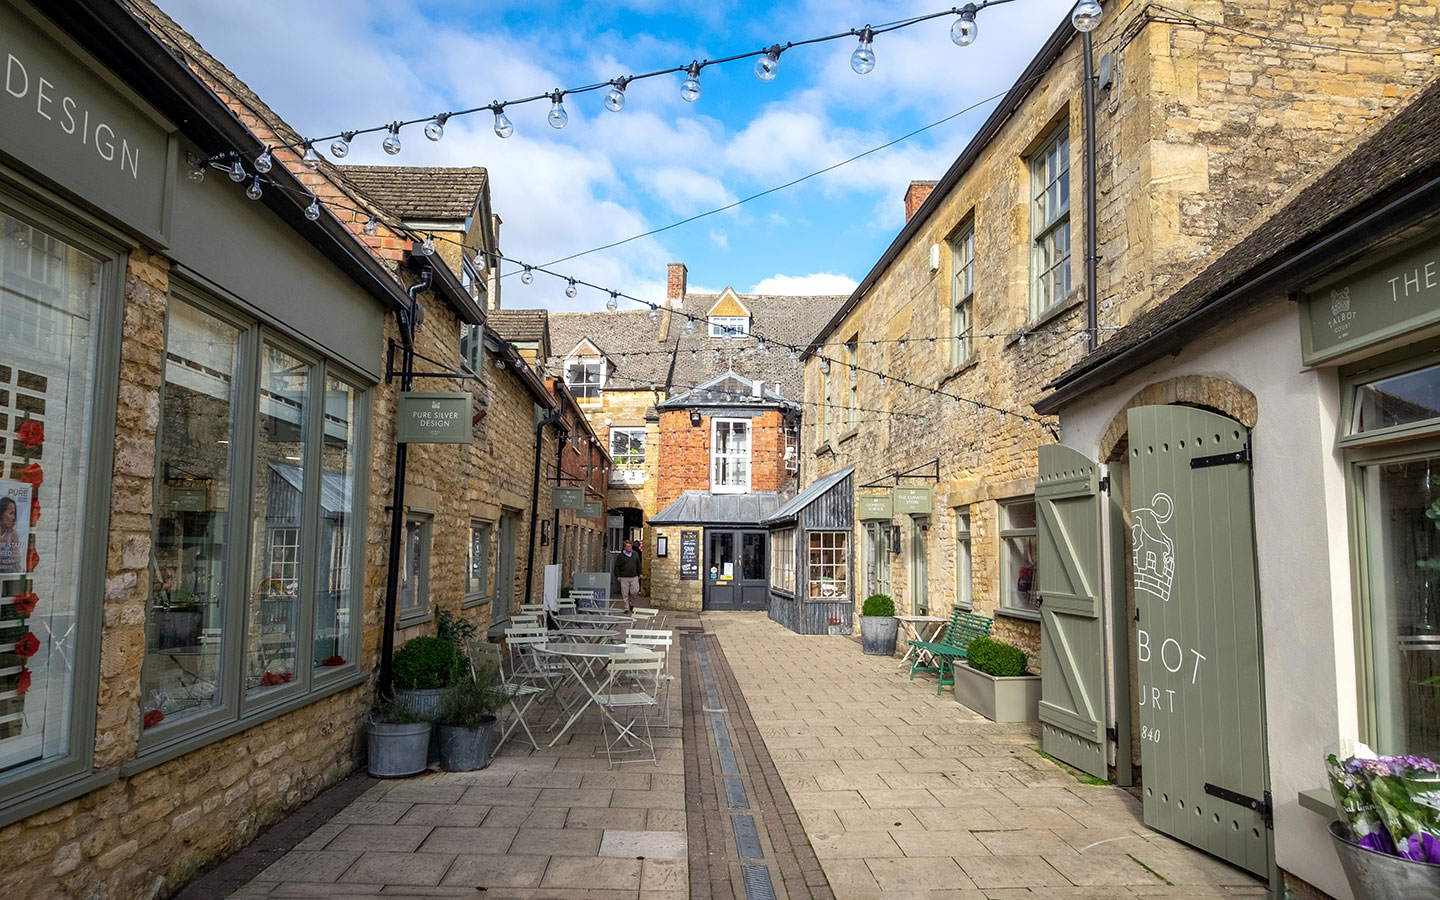 Shopping in Stow-on-the-Wold